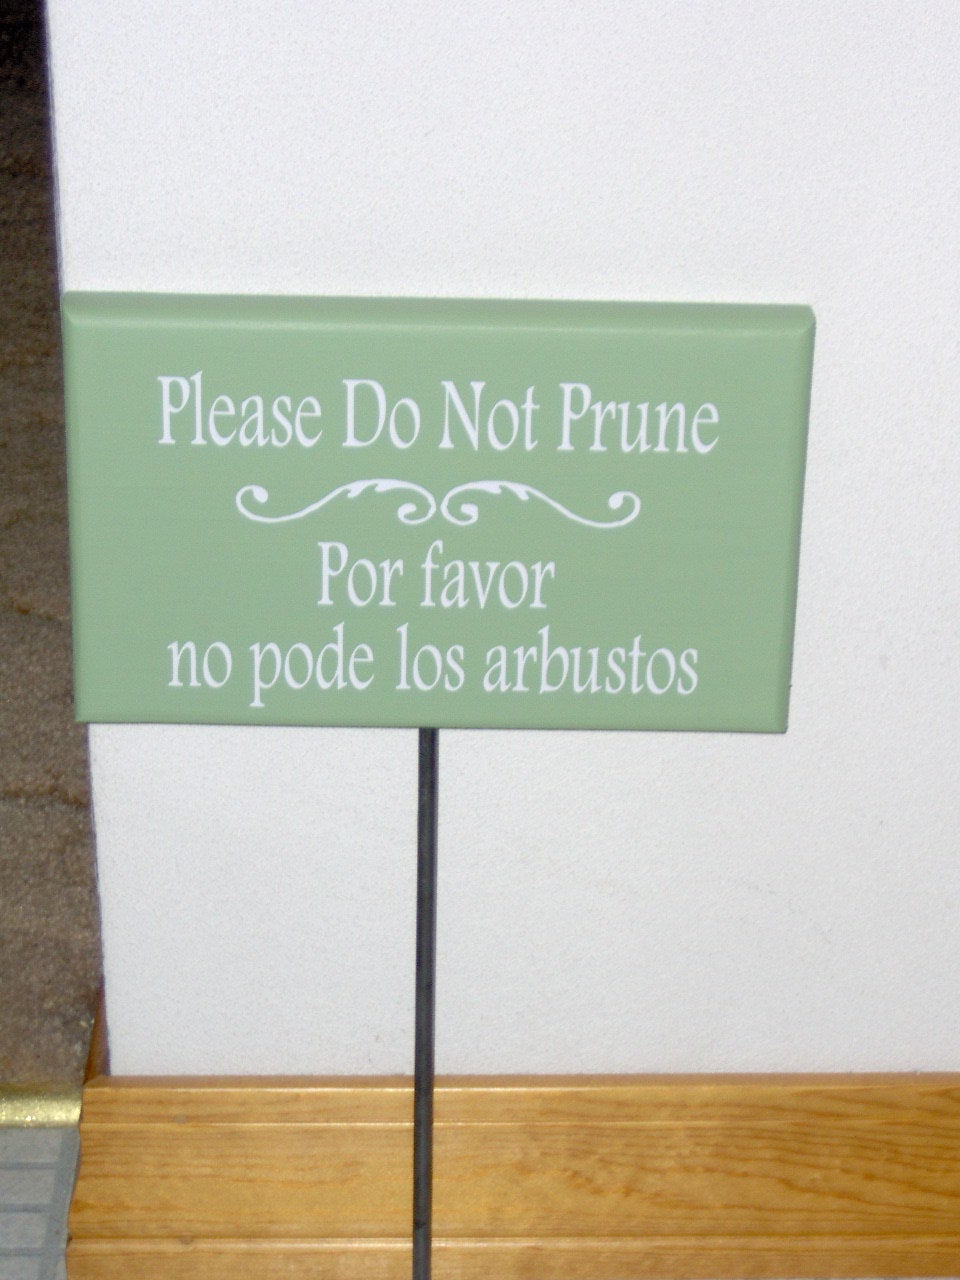 Please Do Not Prune Wood Vinyl Yard Art Stake Sign English Spanish Outdoor Garden Sign Lawn Ornament Outdoor House Sign Wooden Home Decor - Heartfelt Giver